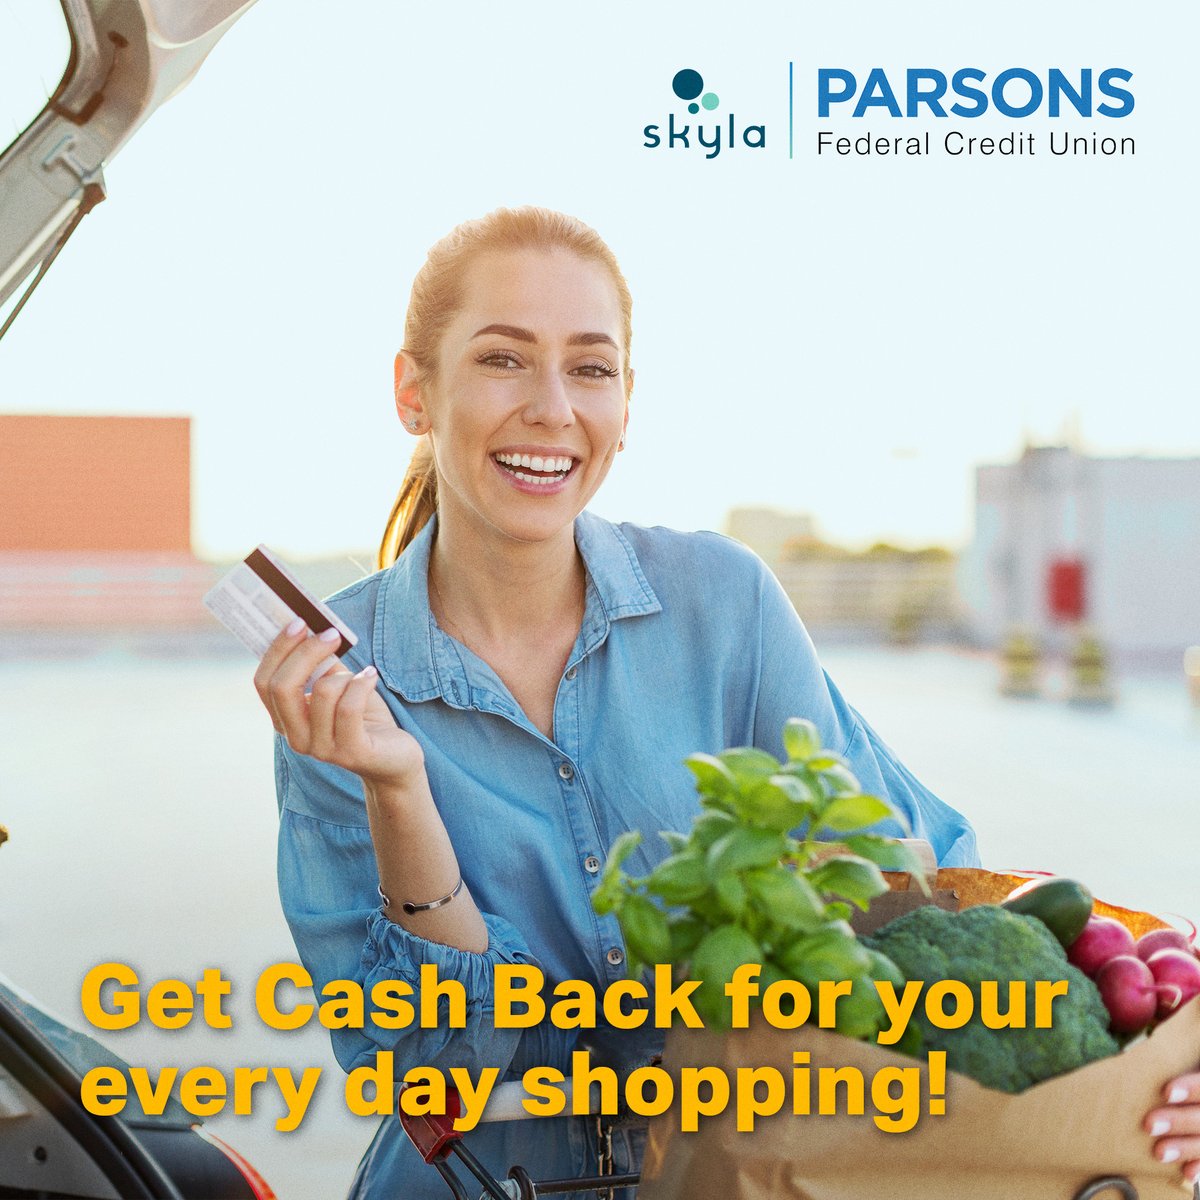 Open a Kasasa® Checking account at Parsons FCU and enjoy 3% cash back on every purchase** OR earn 3.00% APY* on your deposit balance! Link in bio for more details.

#AskForKasasa #BeProudOfYourMoney #financialindependence #financialfreedom #personalfinance#financialjoy #debtfree